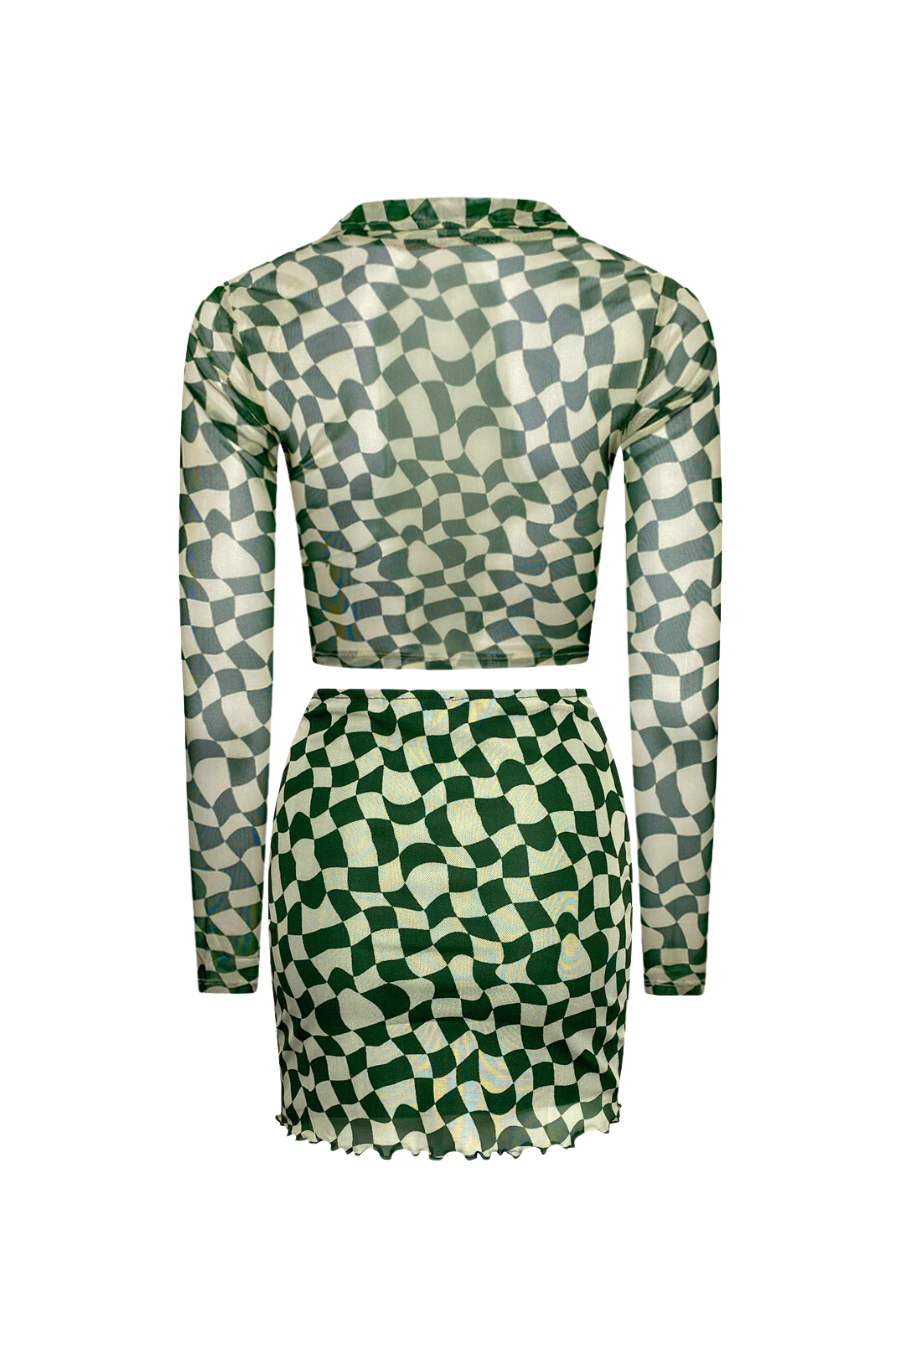 "WAVY CHECKERS" Forest Green & Cream Print Mesh Two-Piece Set